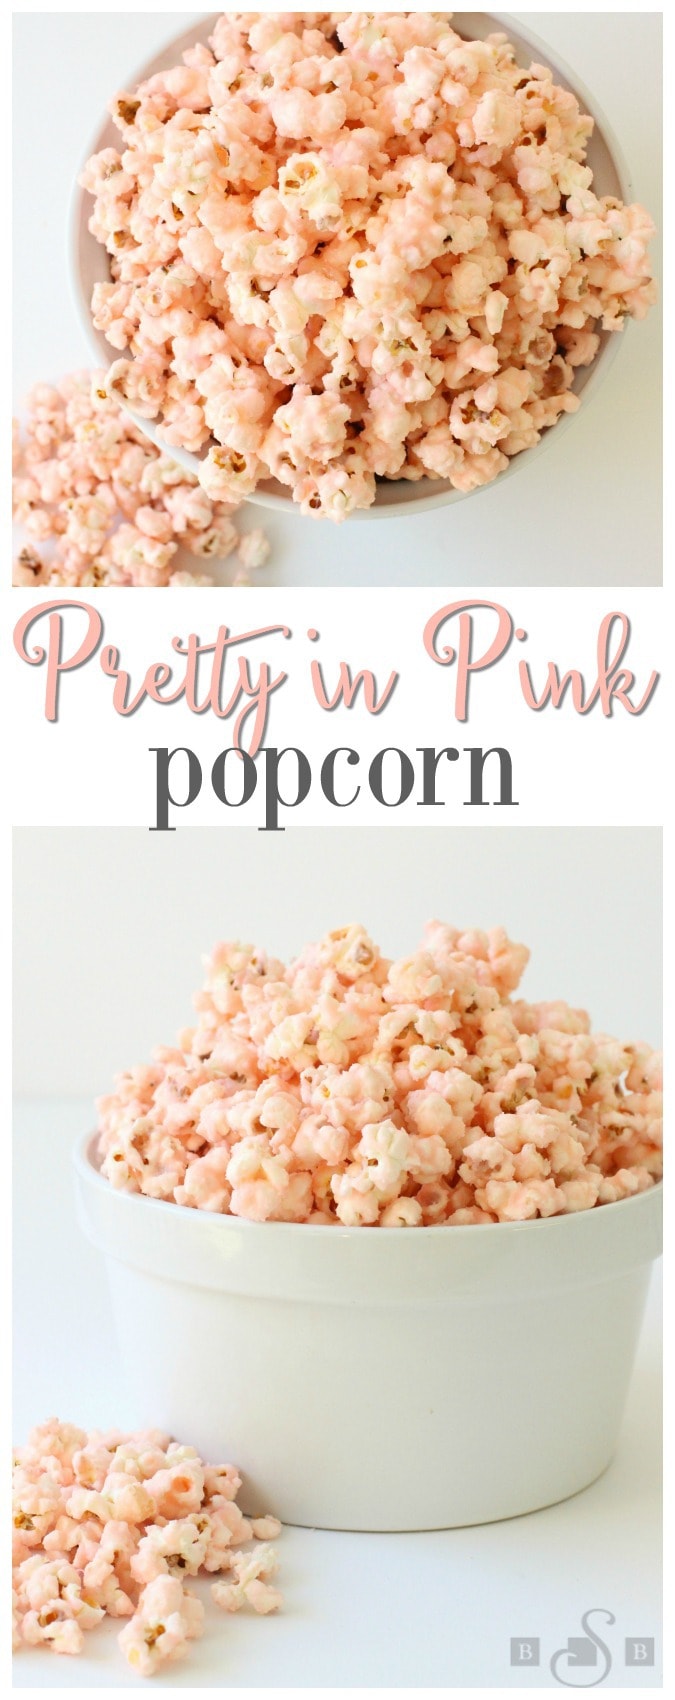 Today is National Popcorn Day and to celebrate I thought it'd be fun to make some Old Fashioned Pink Popcorn. Isn't it pretty? Trust me, it tastes just as good as it looks- and it's super easy to make as well!